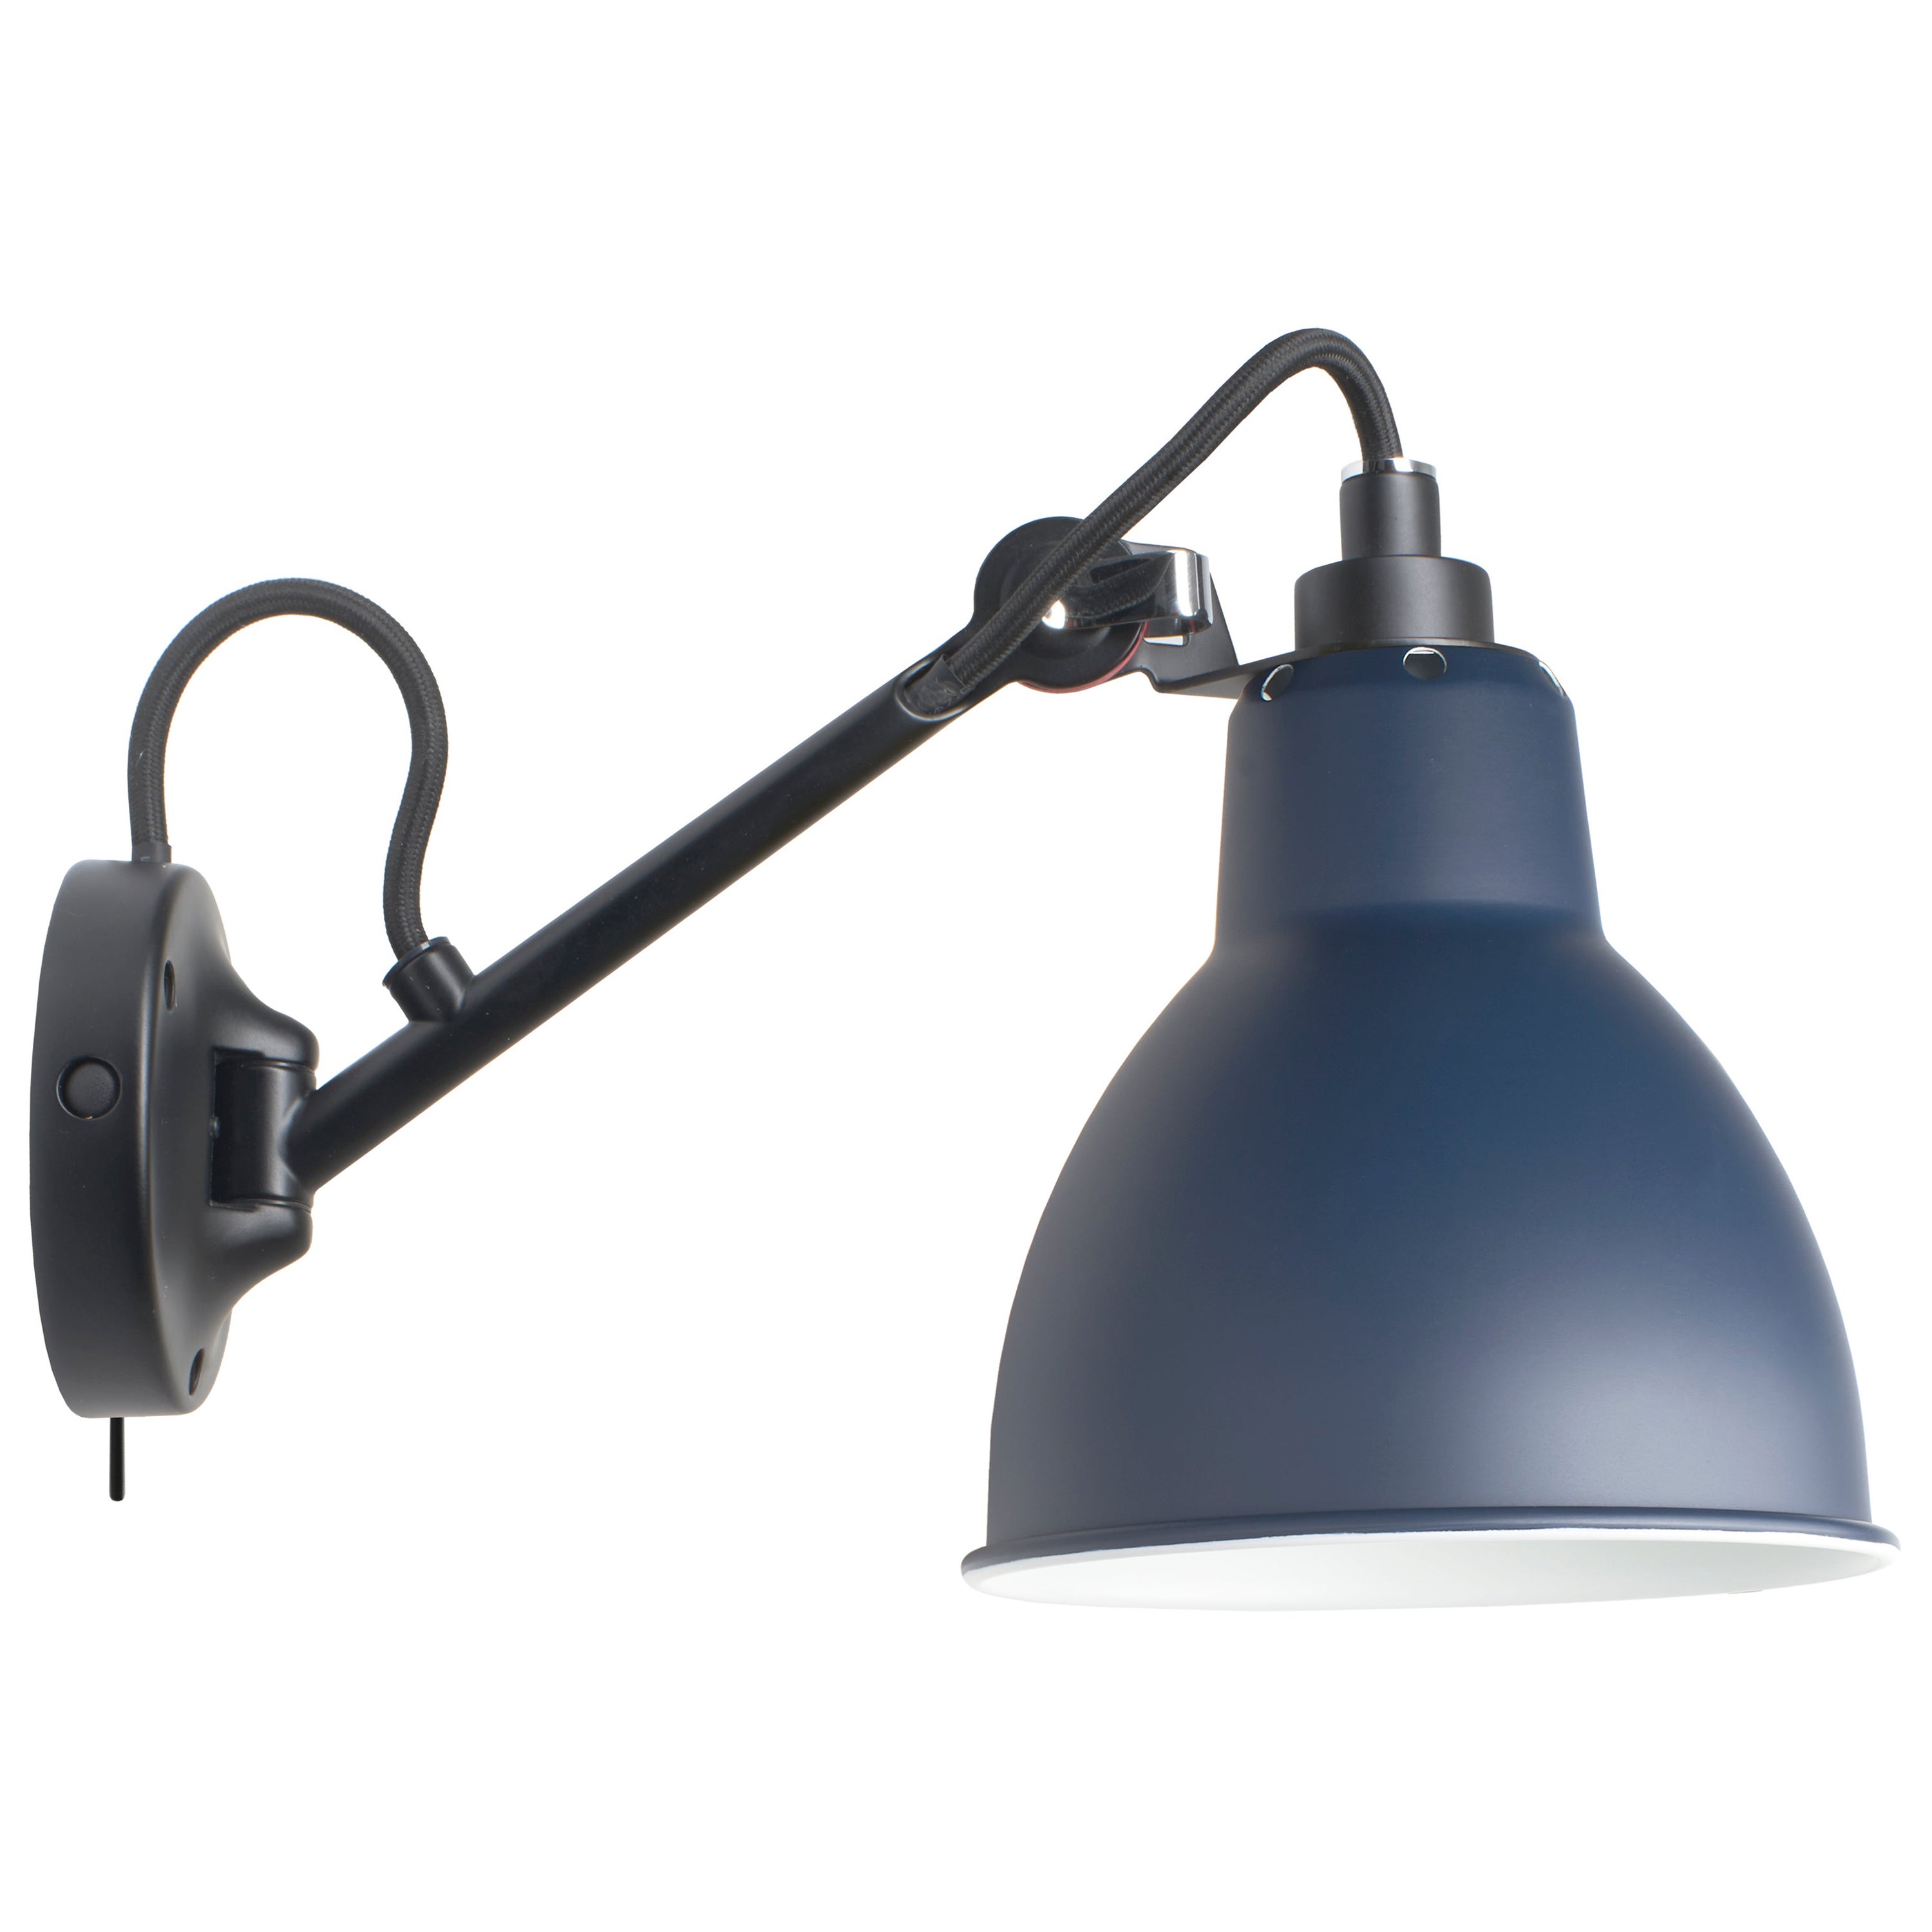 DCW Editions La Lampe Gras N°104 SW Wall Lamp in Black Arm and Blue Shade For Sale